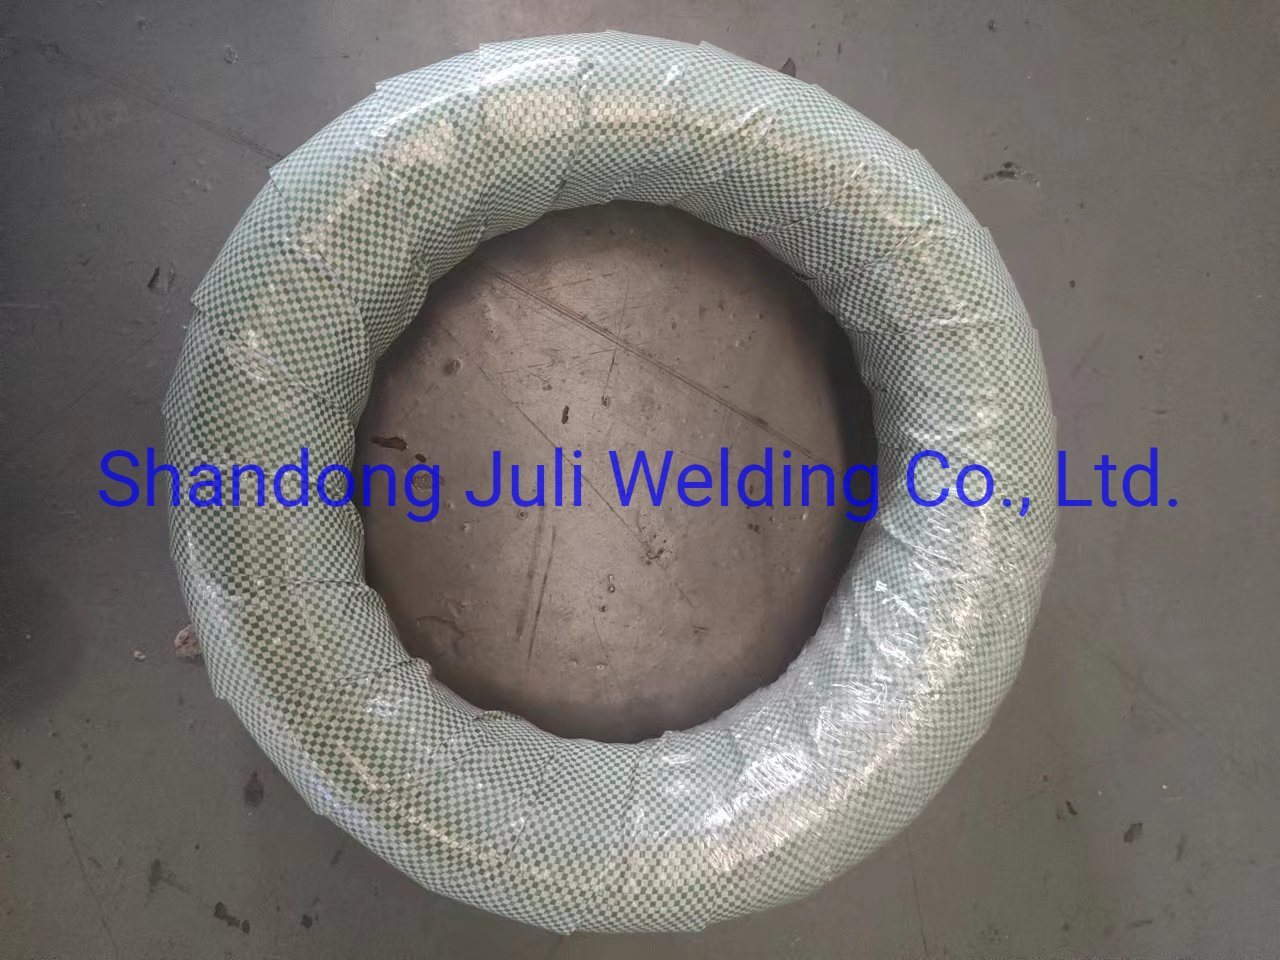 High-Speed High Strength Quality Low Price Smooth Stainless Steel Conveying Net Use Wea Stainless Steel Weaving Wire Braiding Wire